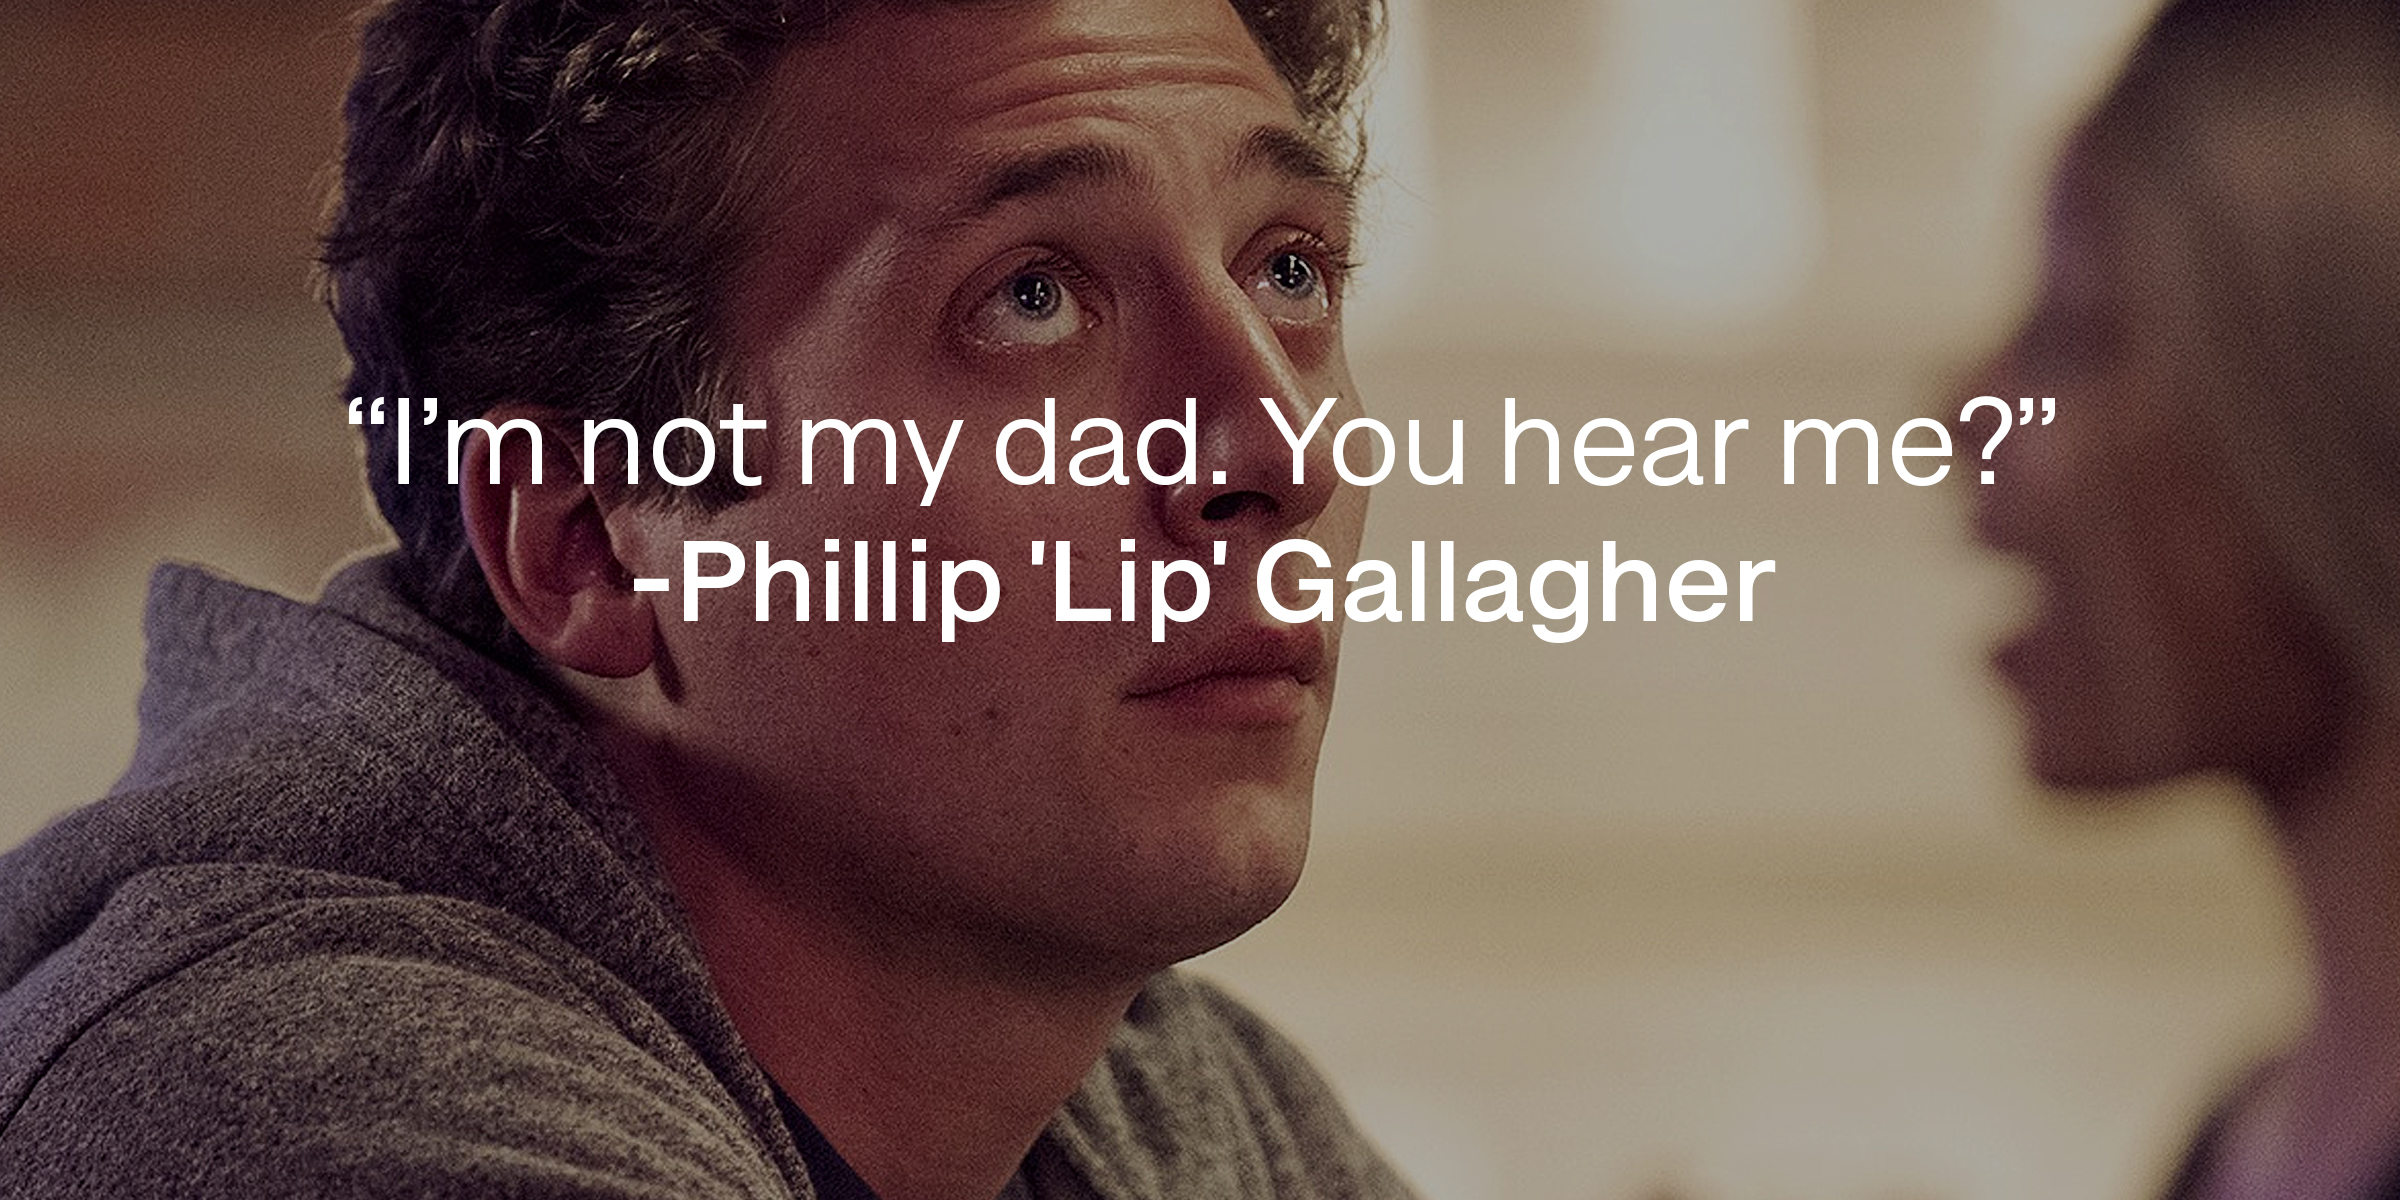 Phillip 'Lip' Gallagher with his quote: “I’m not my dad. You hear me?” | Source: facebook.com/ShamelessOnShowtime